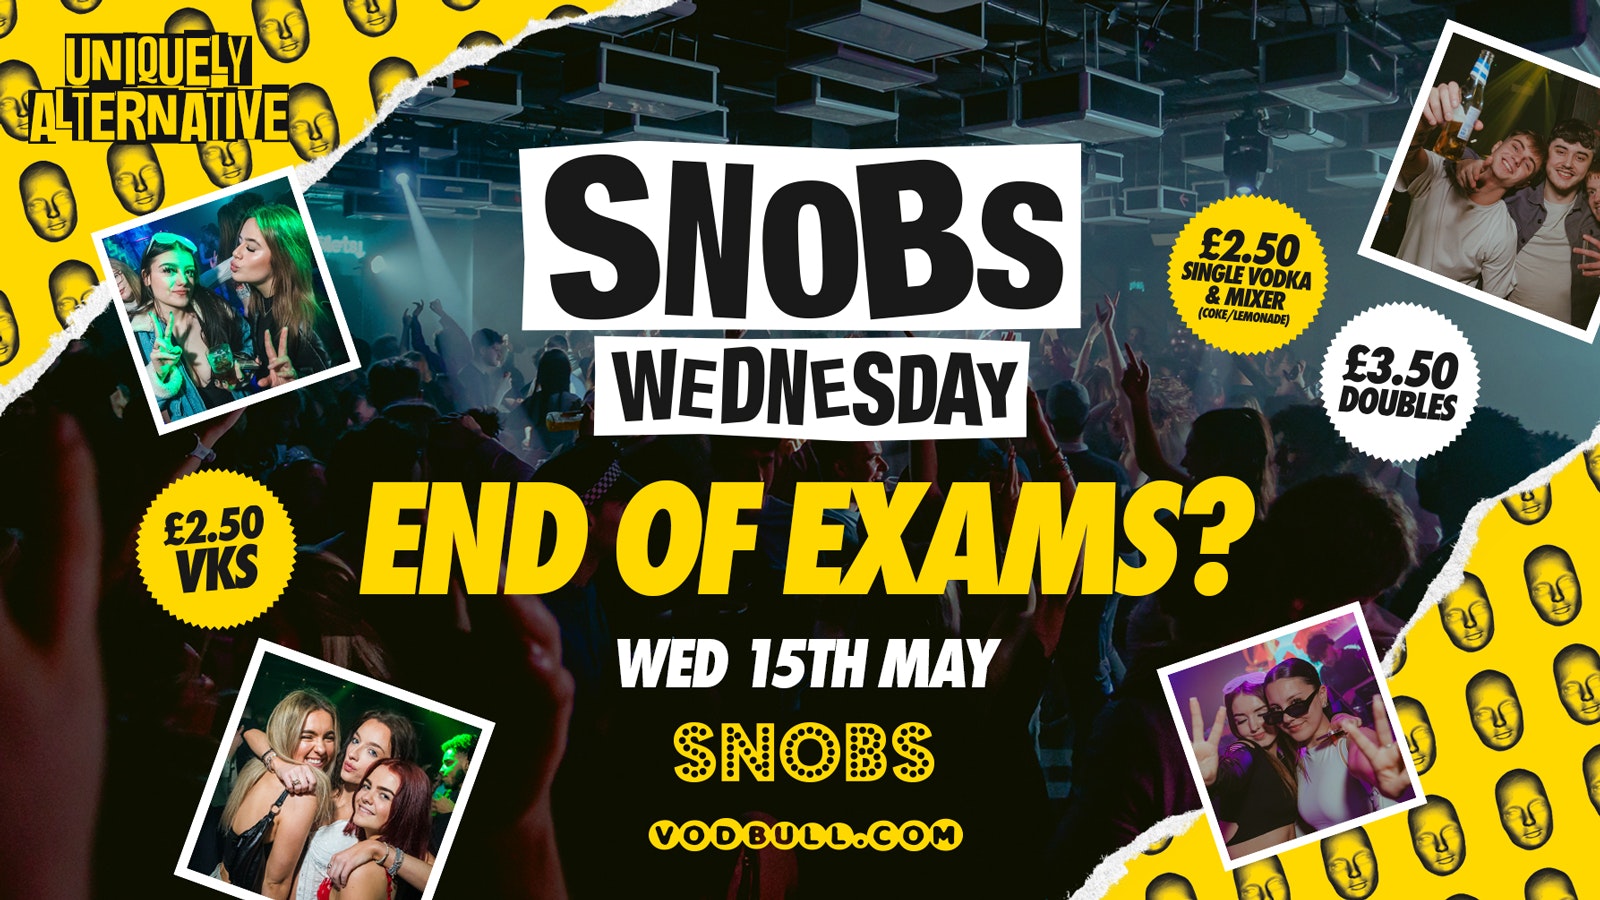 🎶 Snobs Wednesday!! FINISHED EXAMS EARLY? JOIN US! 🎶 15/05